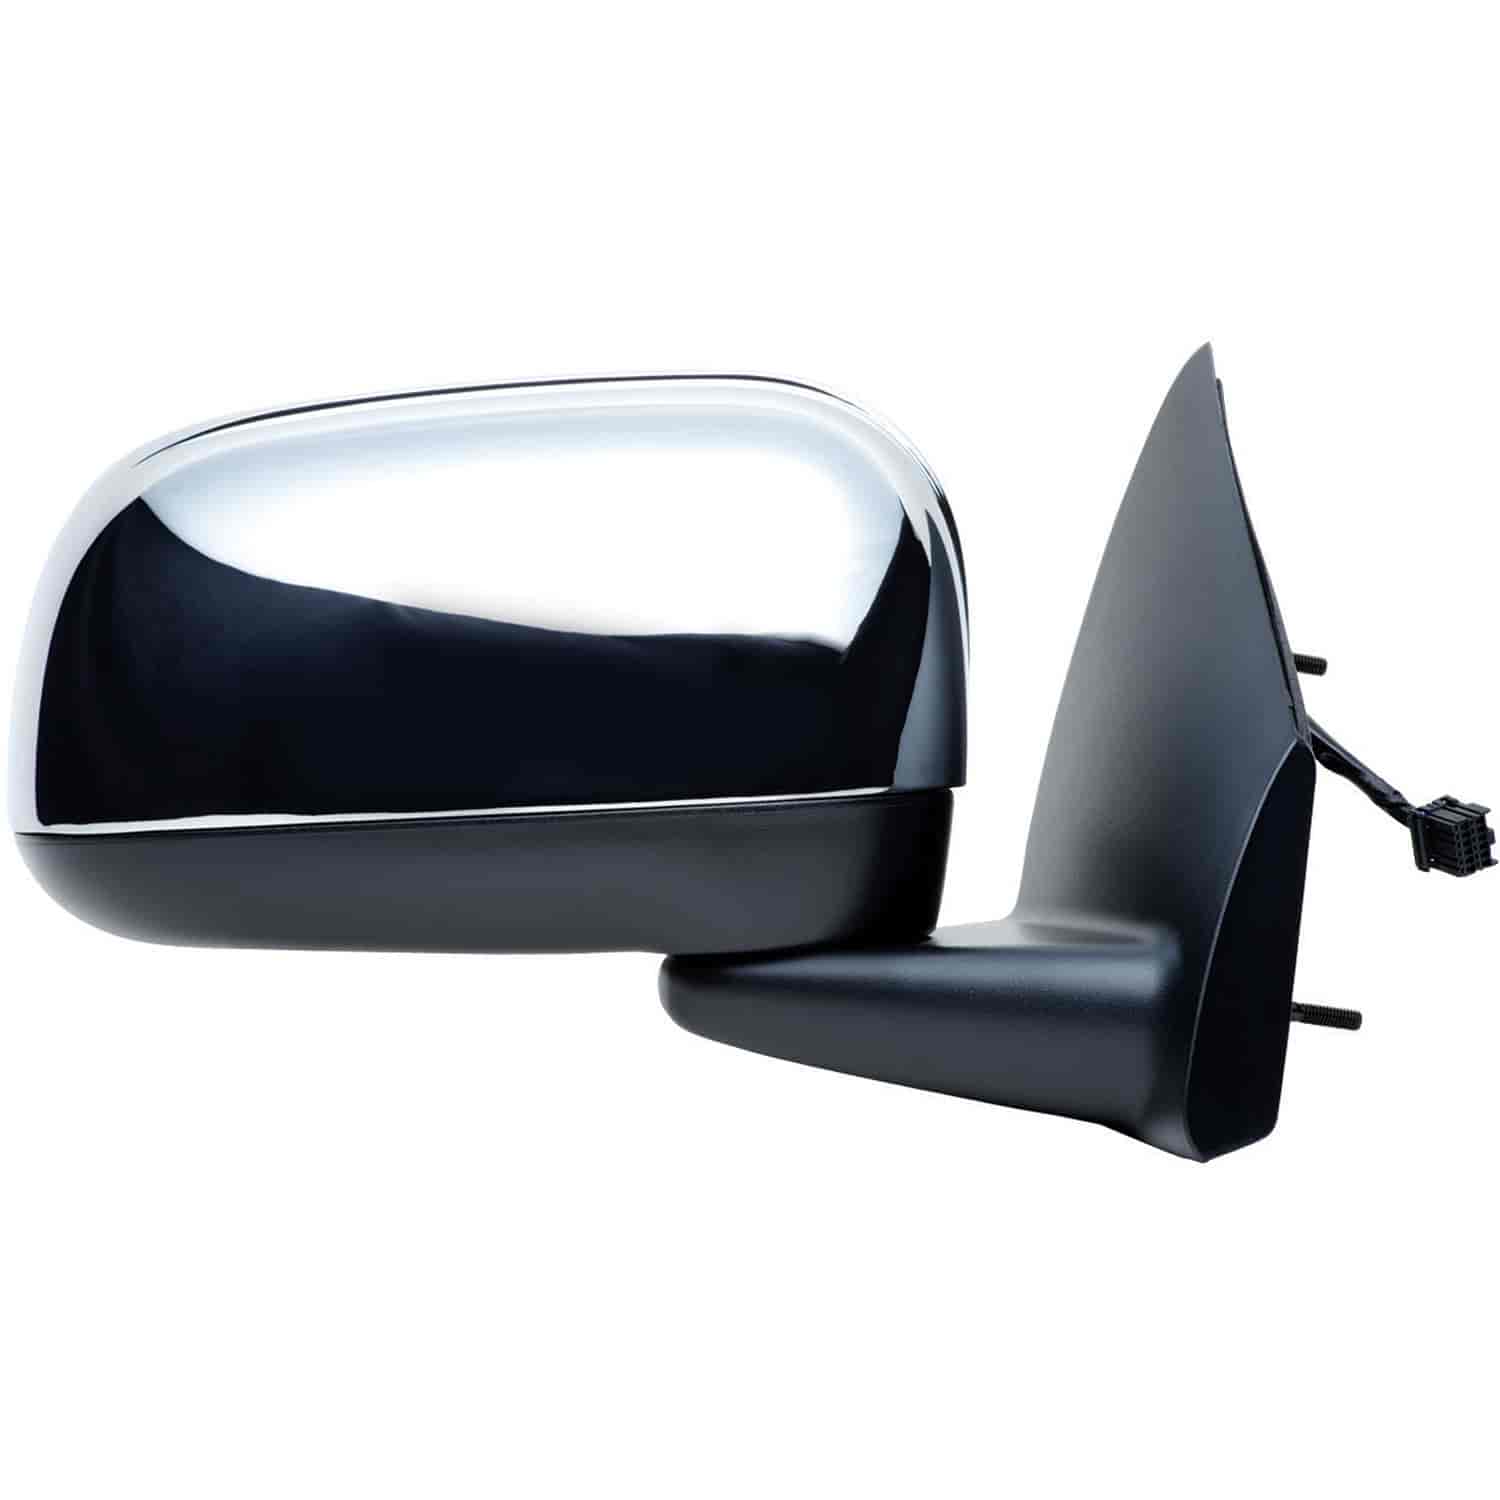 OEM Style Replacement mirror for 07-09 Chrysler Aspen GTS code passenger side mirror tested to fit a